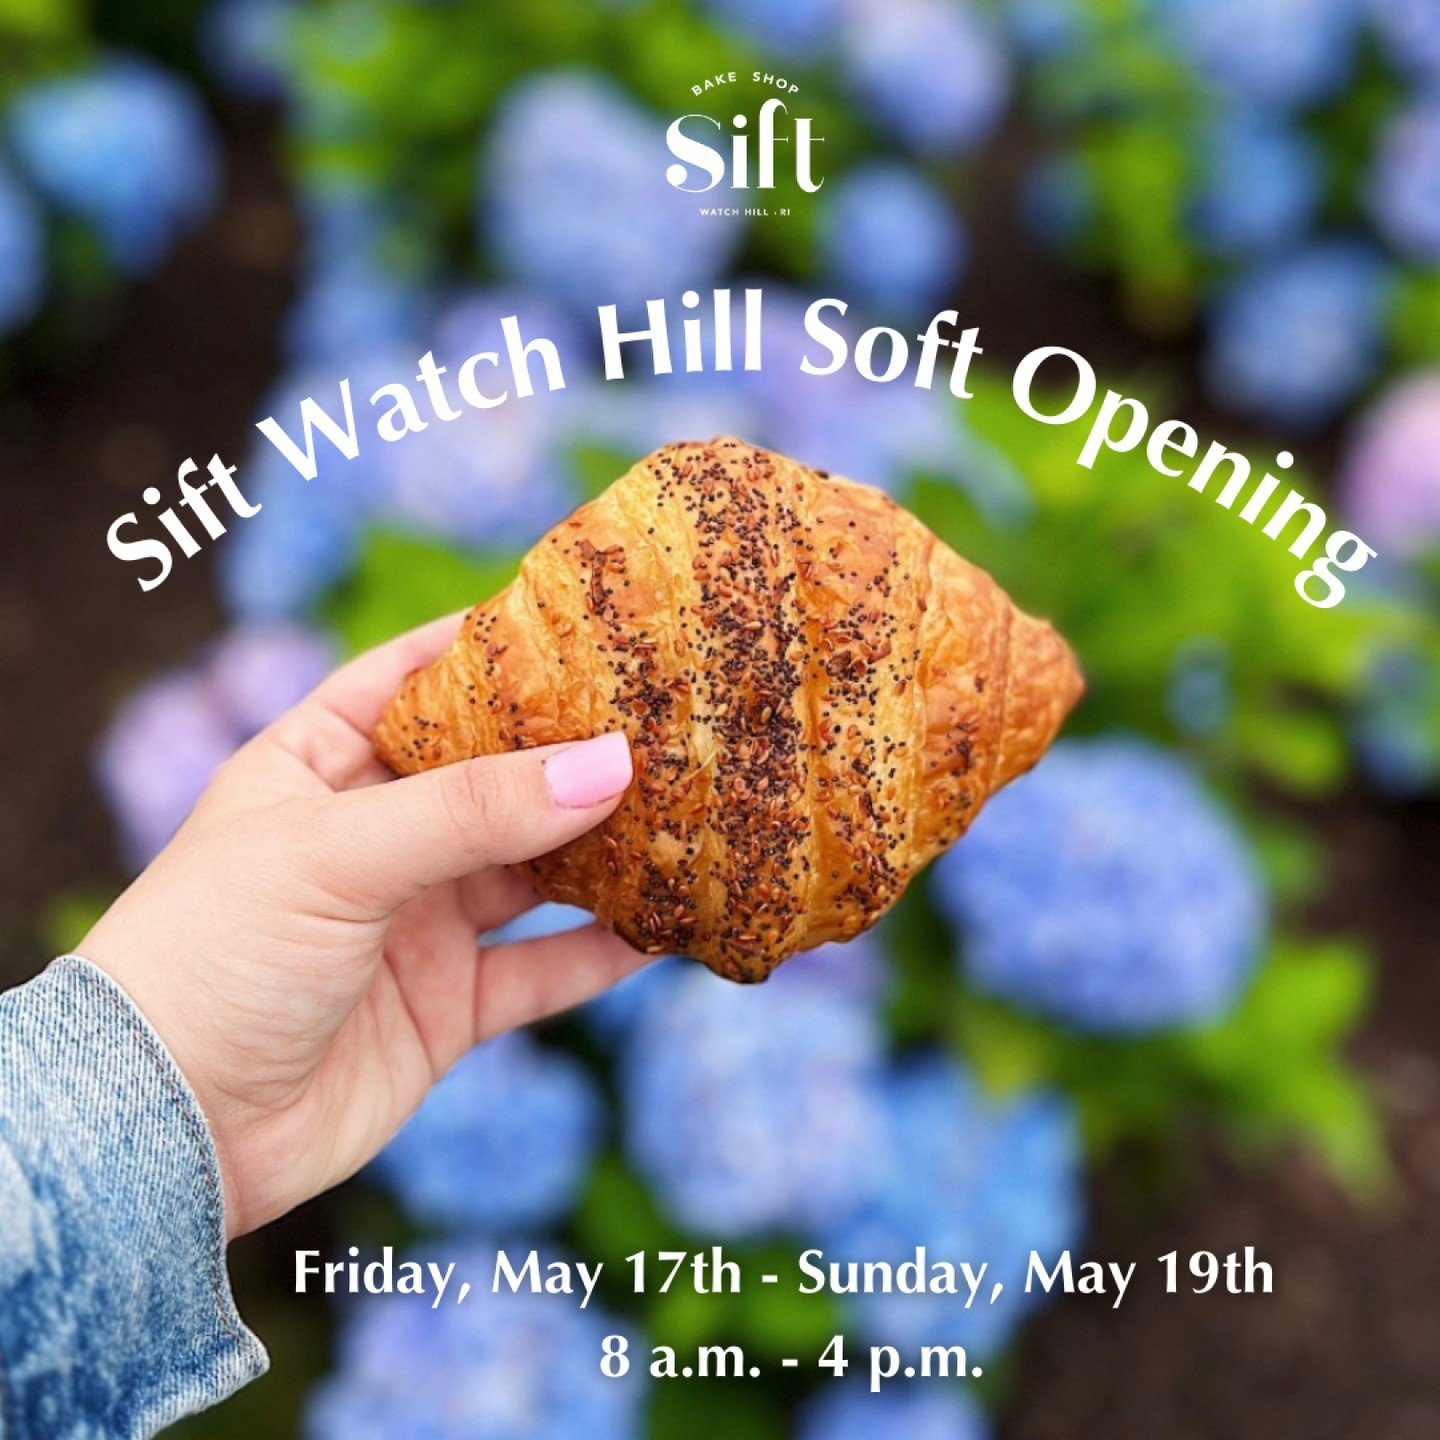 Sharing some sunshine on this rainy day... Sift Watch Hill will have a soft opening, Friday, May 17th - Sunday, May 19th from 8 a.m. - 4 p.m. ☀️ 

Starting, Friday, May 24th, Sift Watch Hill will be open seven days a week from 8 a.m. - 4 p.m. through